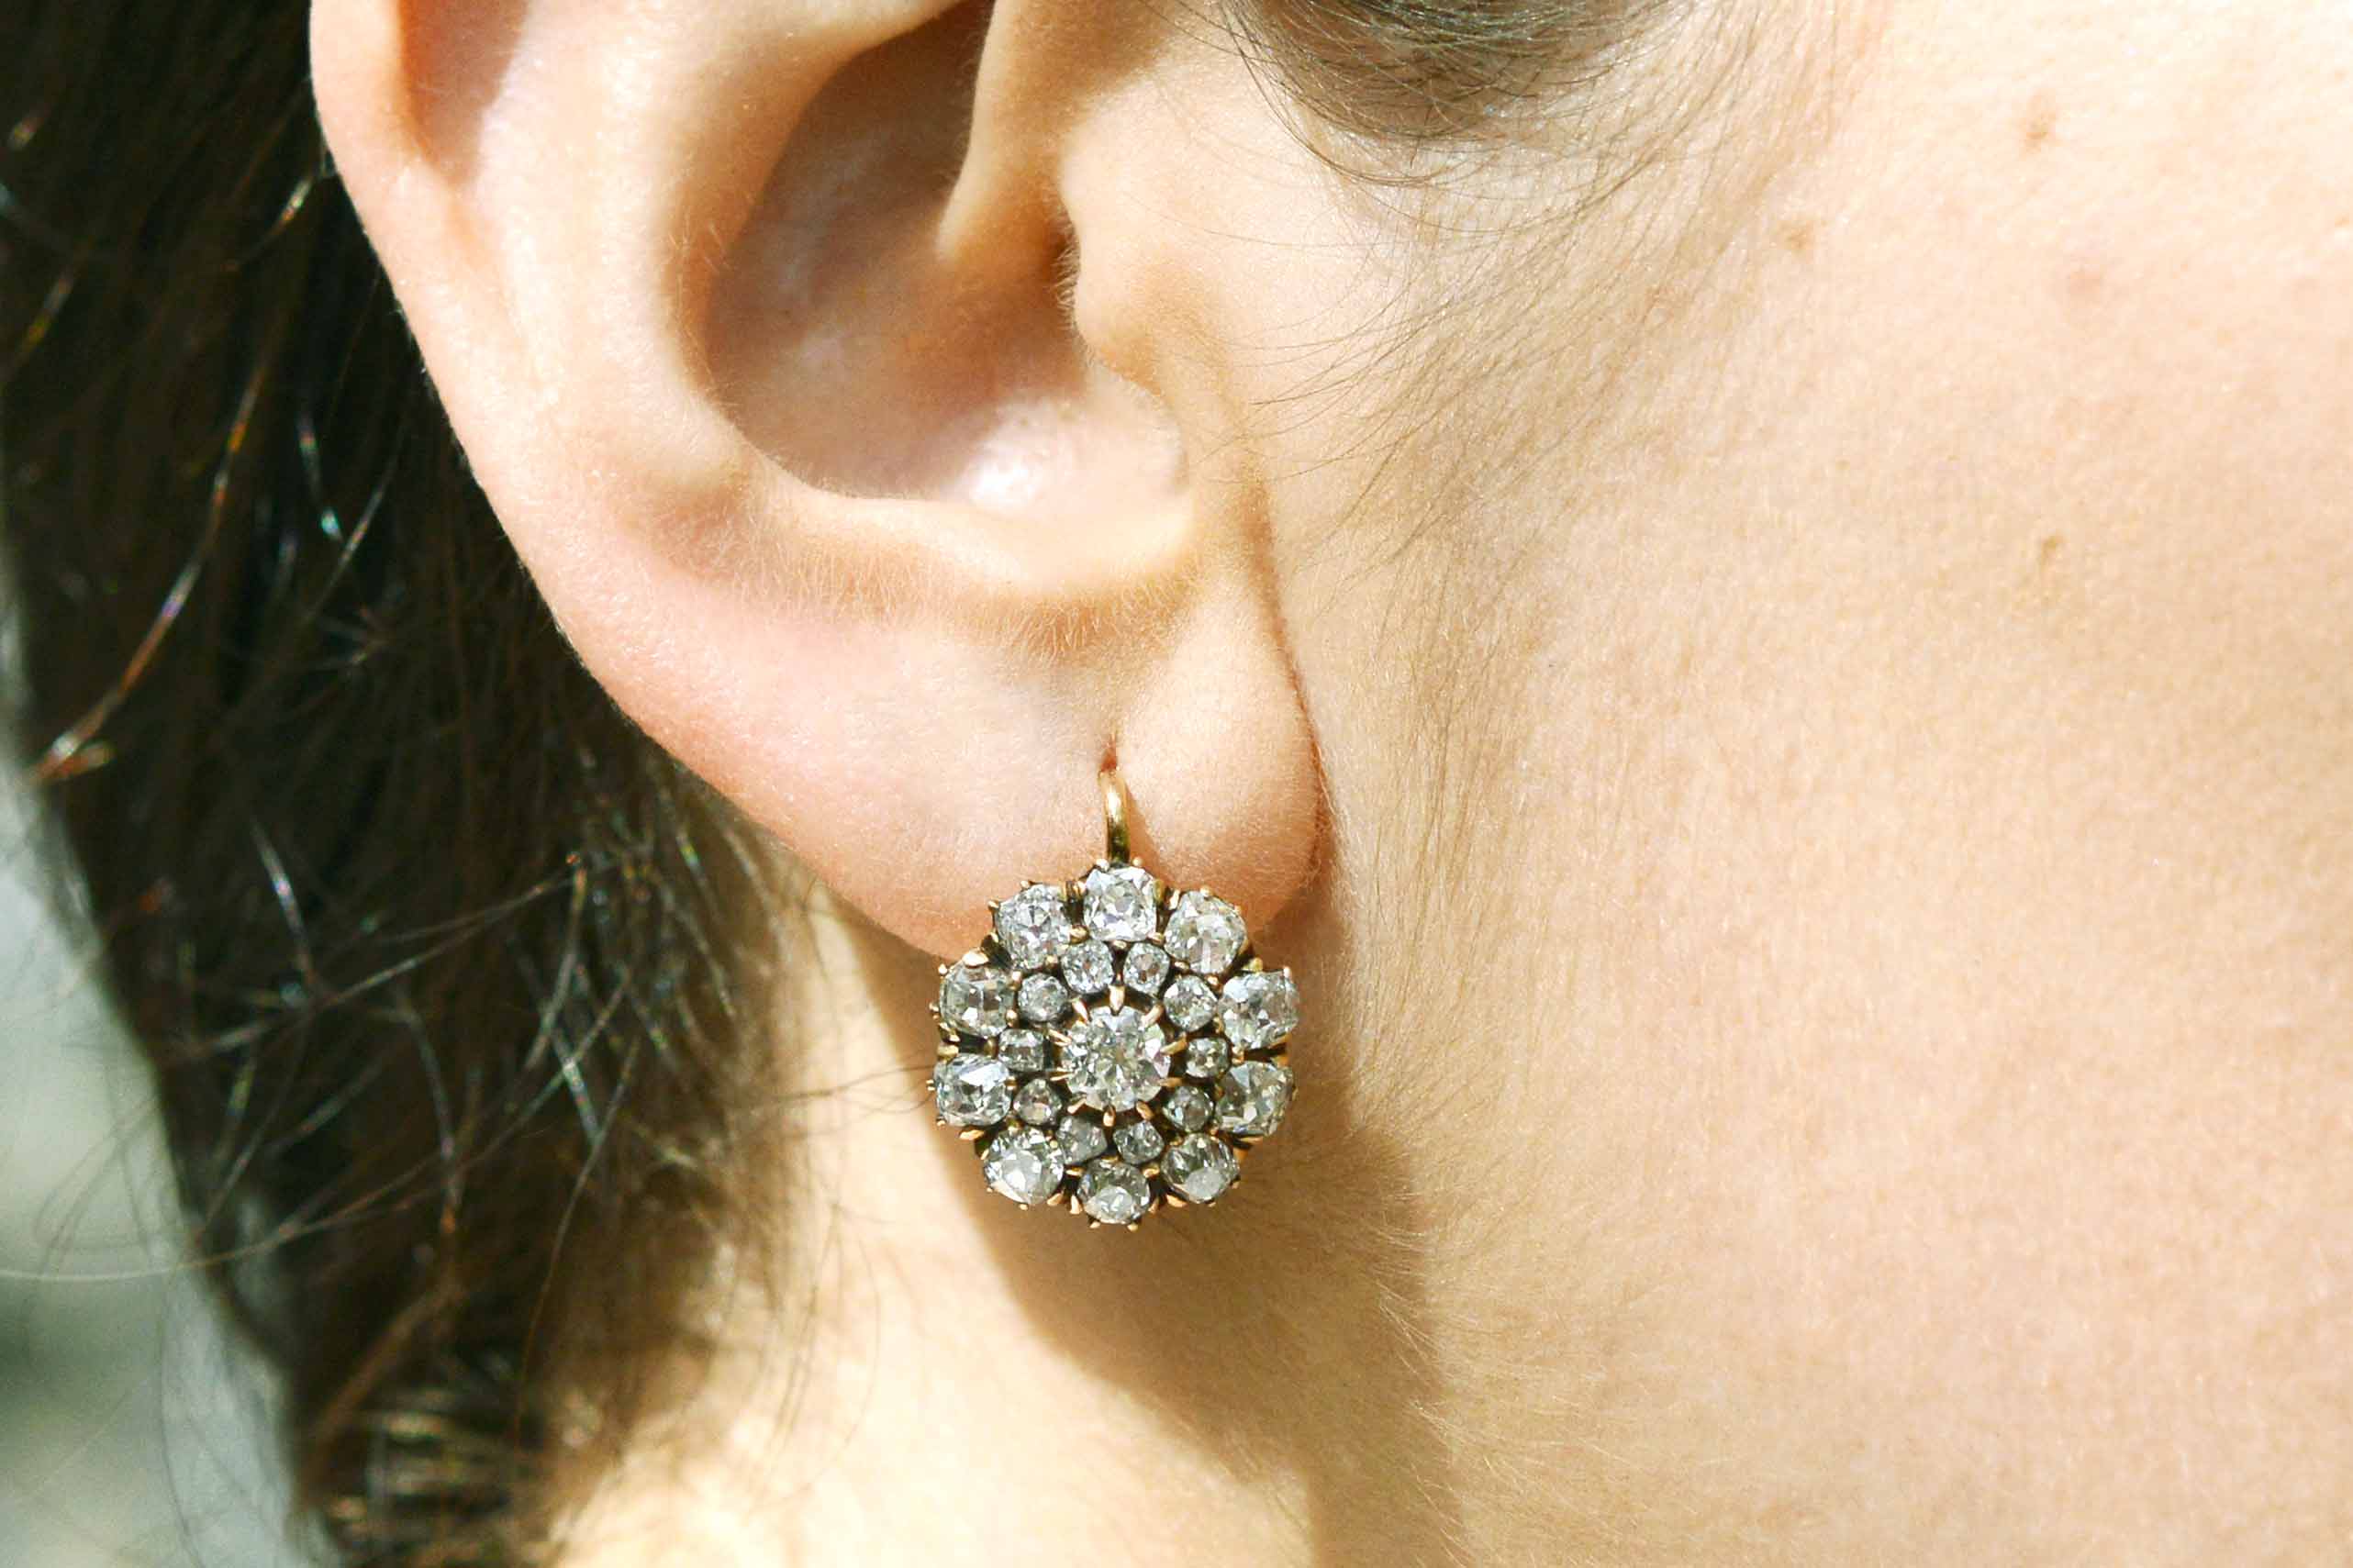 Over 6 carats of sparkling diamonds in a one of a kind earring design.